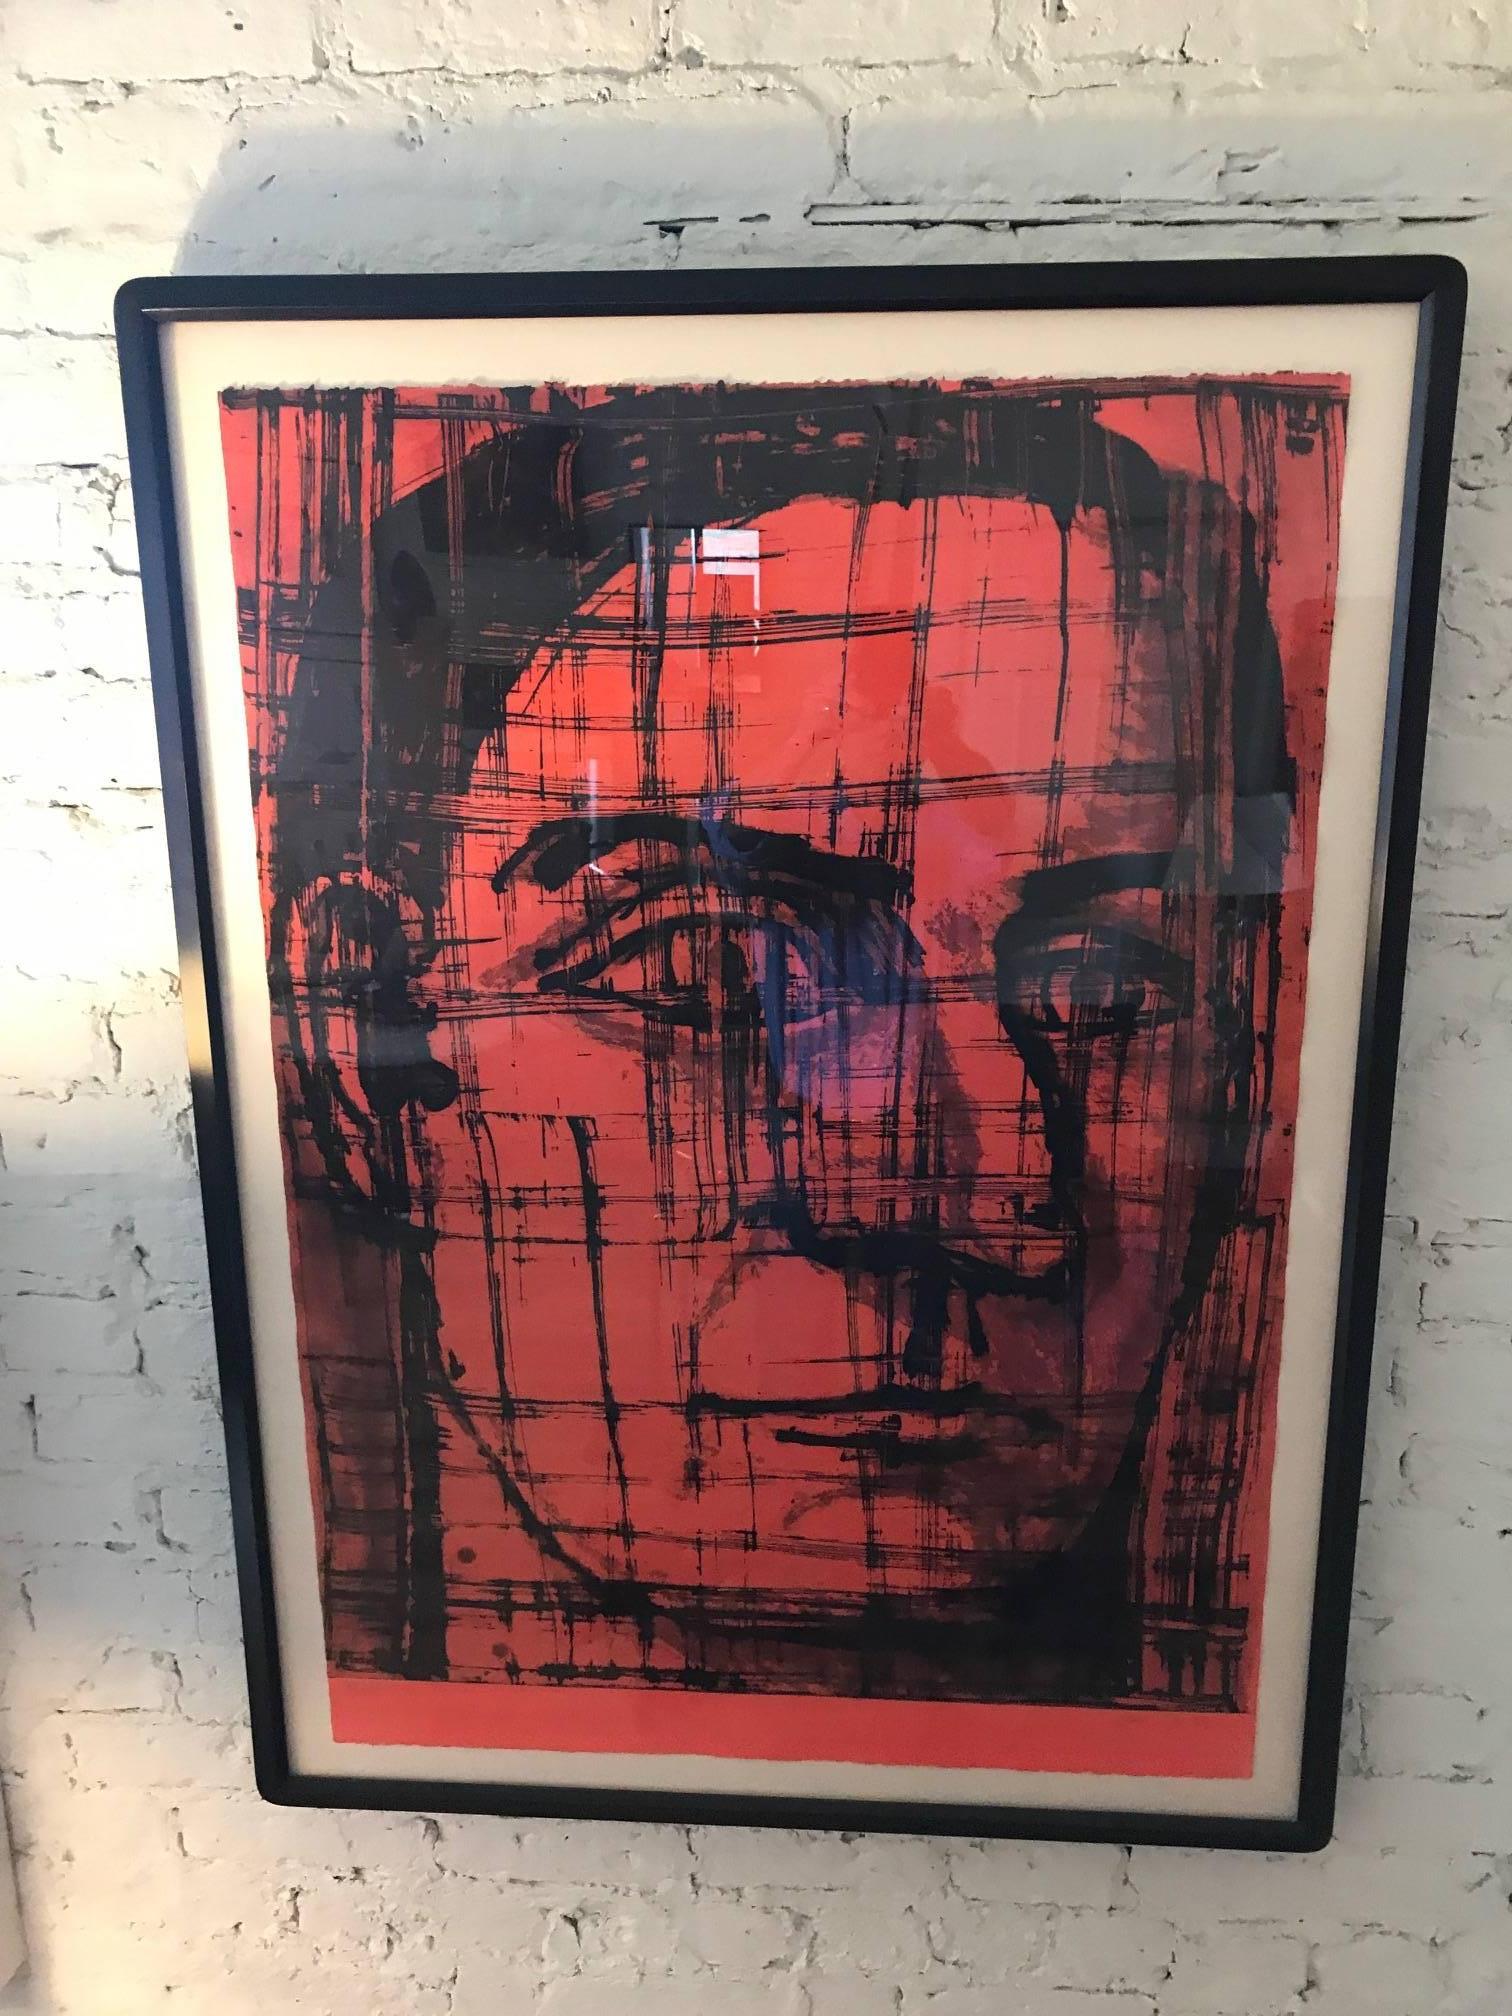 Painted Large Red and Black Portrait Lithograph by Aaron Fink